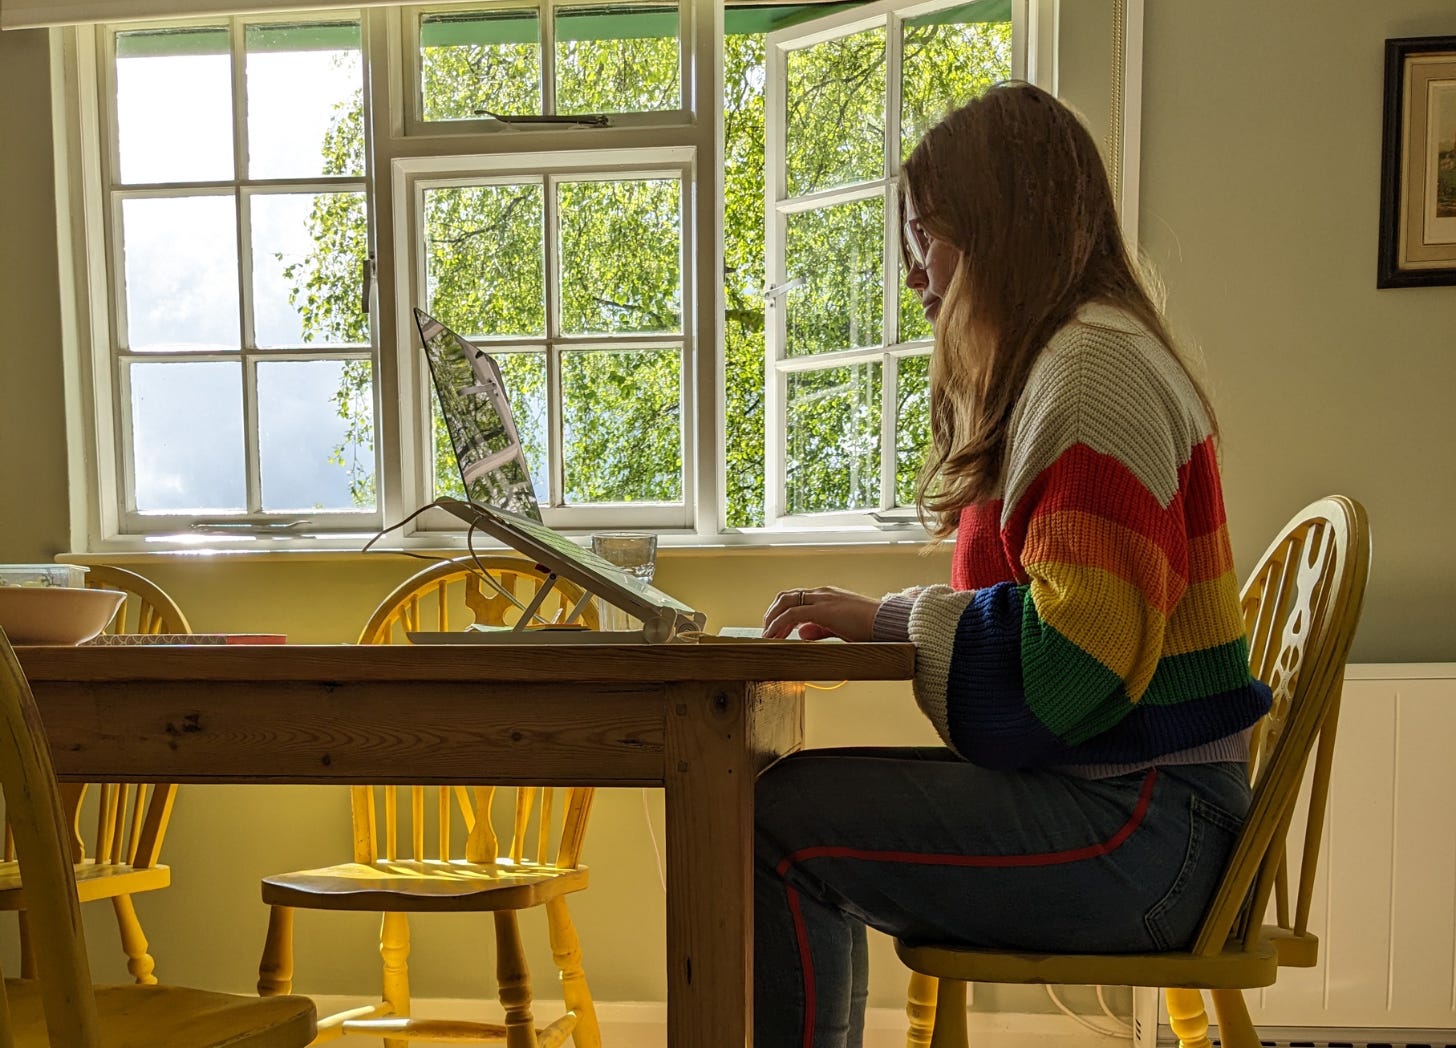 Libby Page is dressed in jeans and a rainbow jumper and sat at a table writing in a sunny room with a window and a view of a tree. 